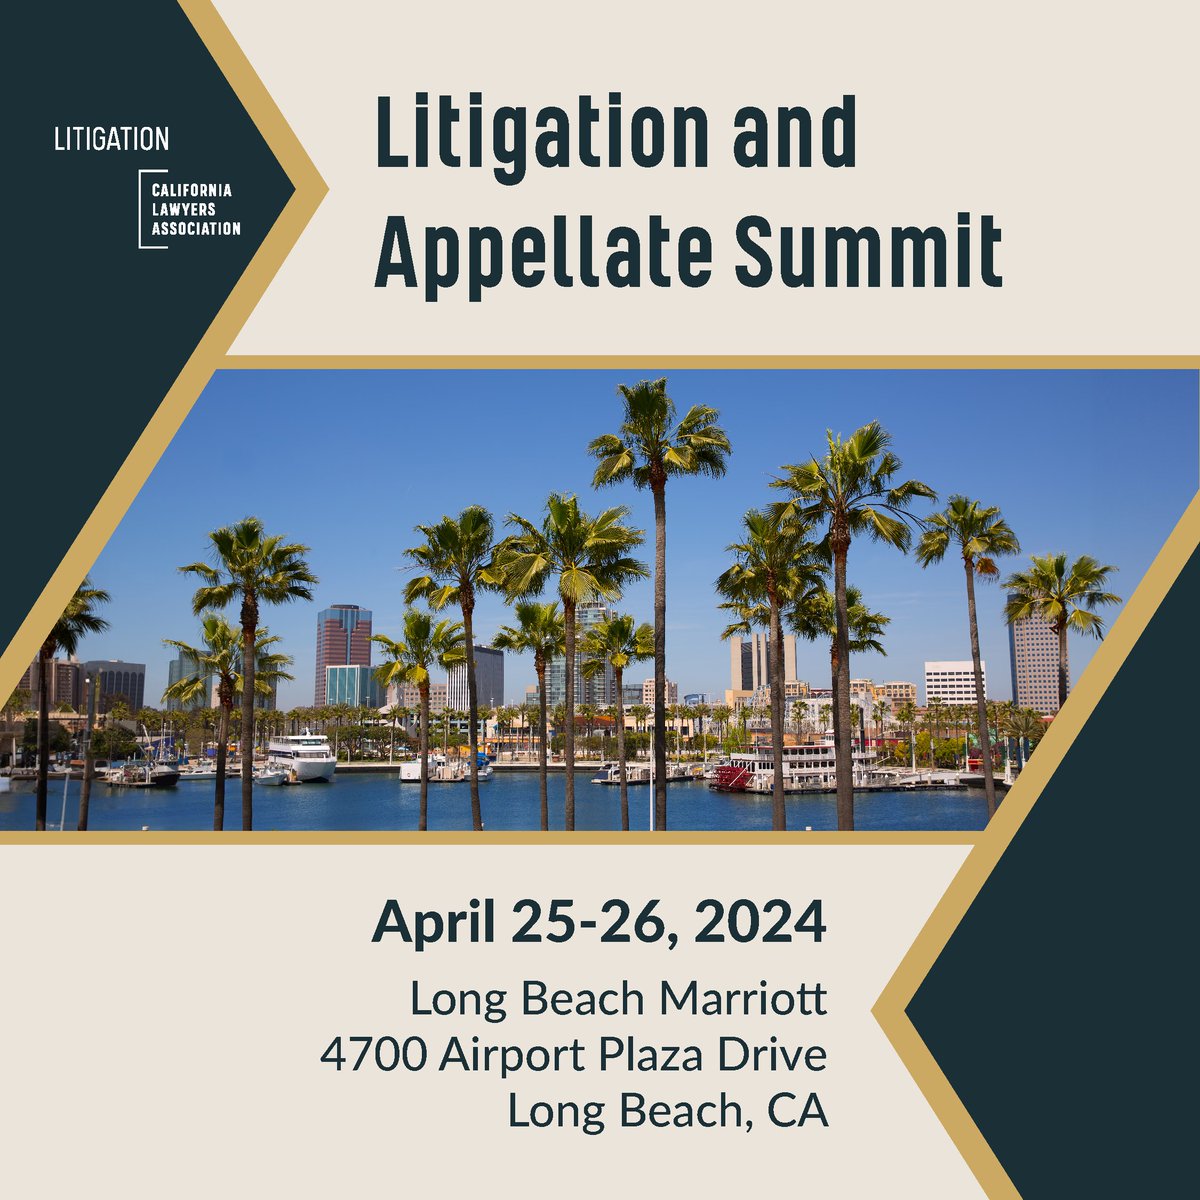 CLA Litigation and Appellate Summit 2024 starts today! 
A don’t miss opportunity to hear Chief Justice Patricia Guerrero & attend sessions on today's critical legal issues in Long Beach. #ParkerShaffieLLP #TheFirmOtherFirmsCall #LegalEthics #AI #CALawyers #CLA #ProudSponsors